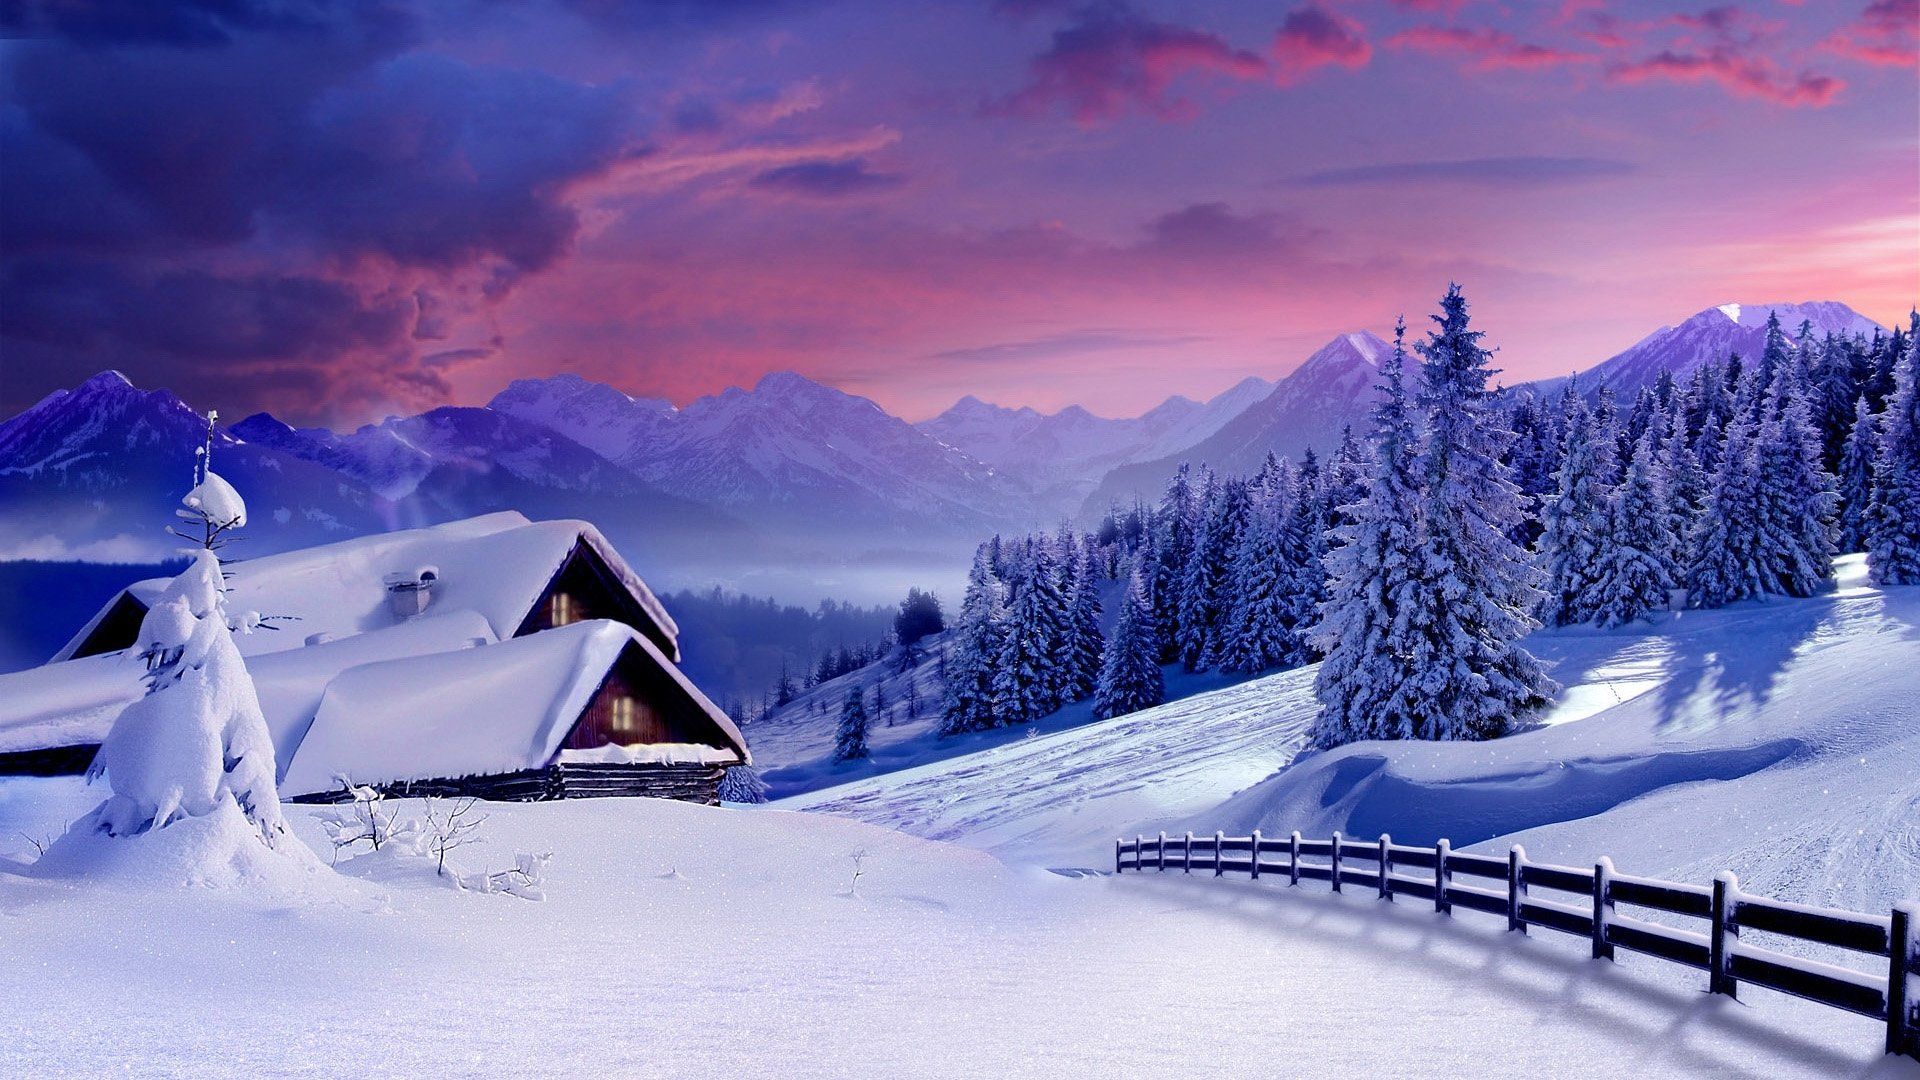 Snowy house in the mountains wallpaper 1920x1080 - Winter